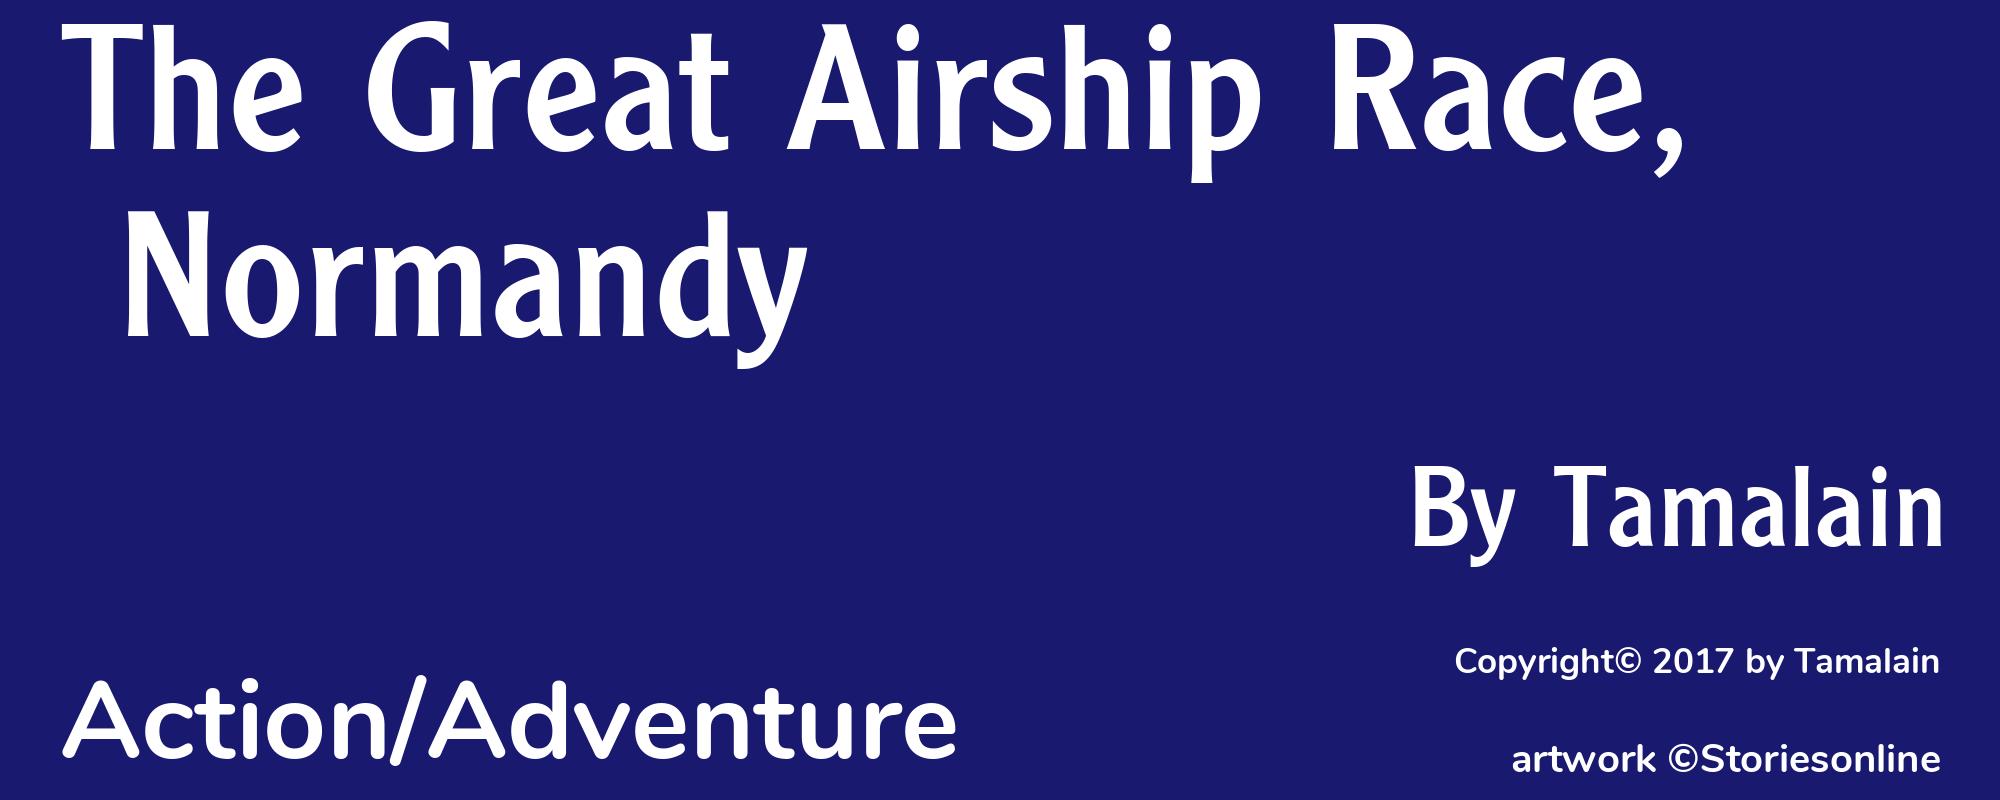 The Great Airship Race, Normandy - Cover